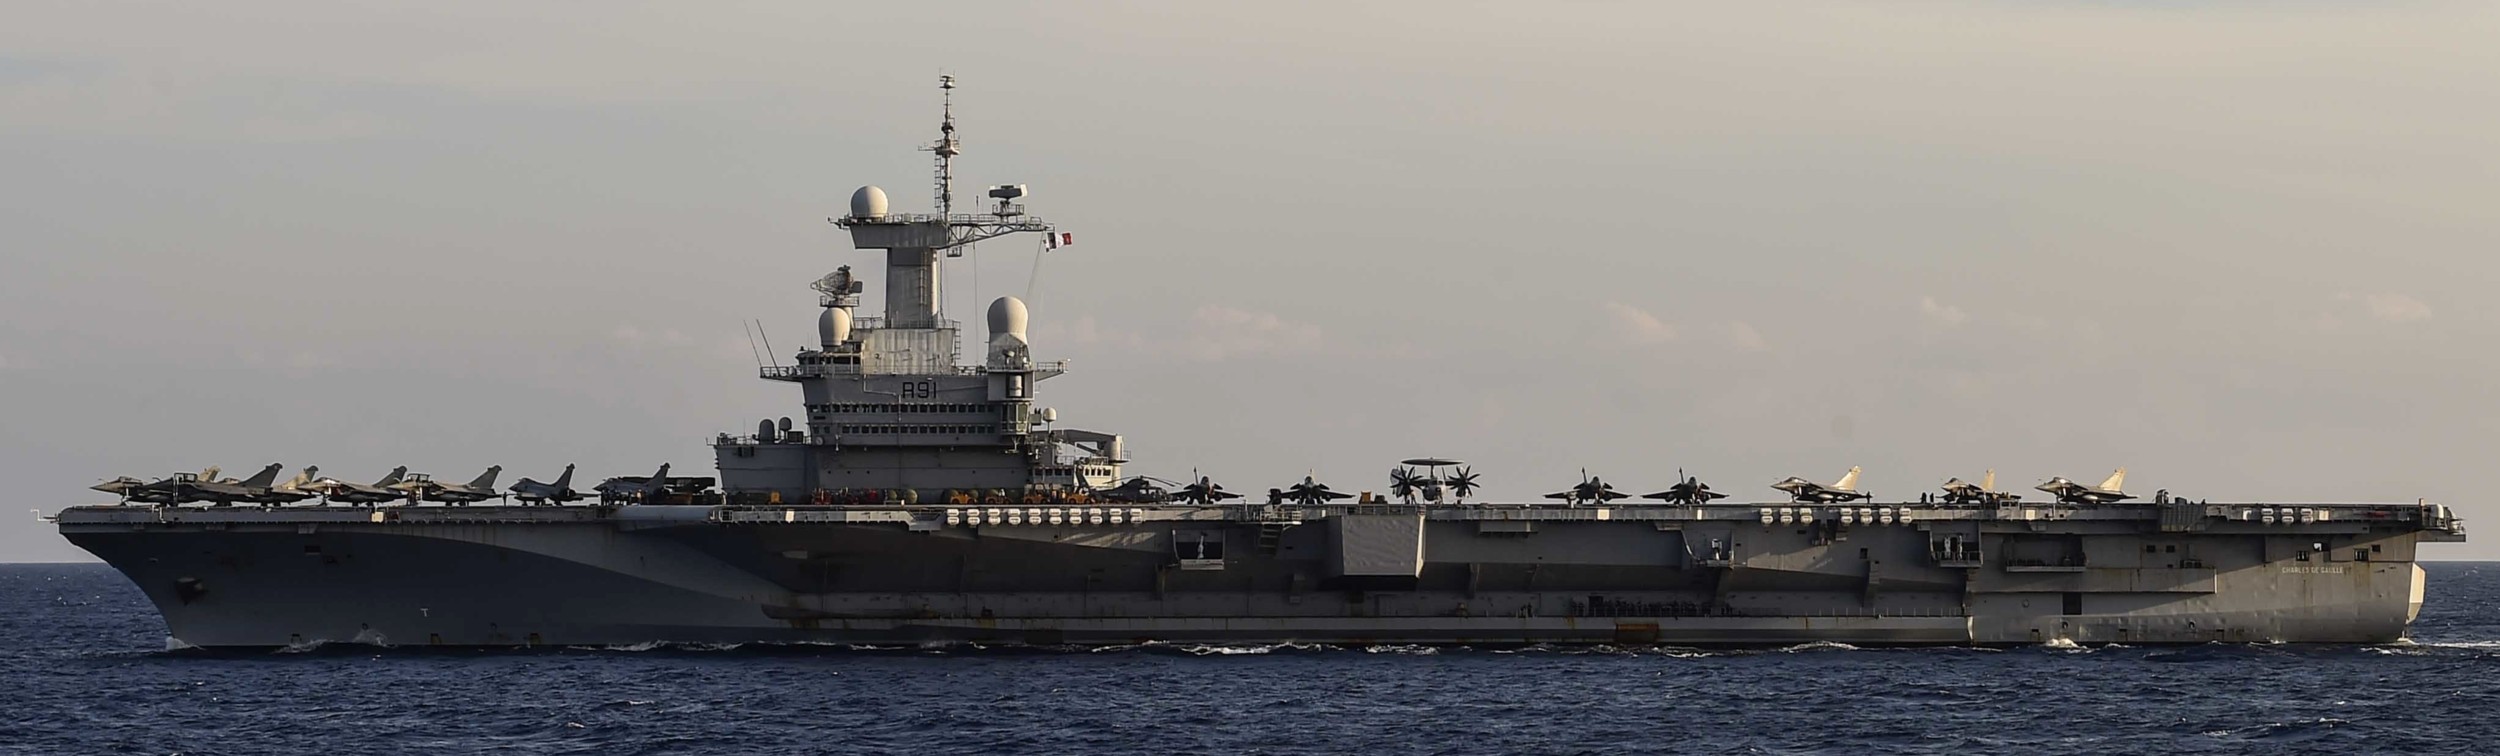  r-91 fs charles de gaulle aircraft carrier french navy 45